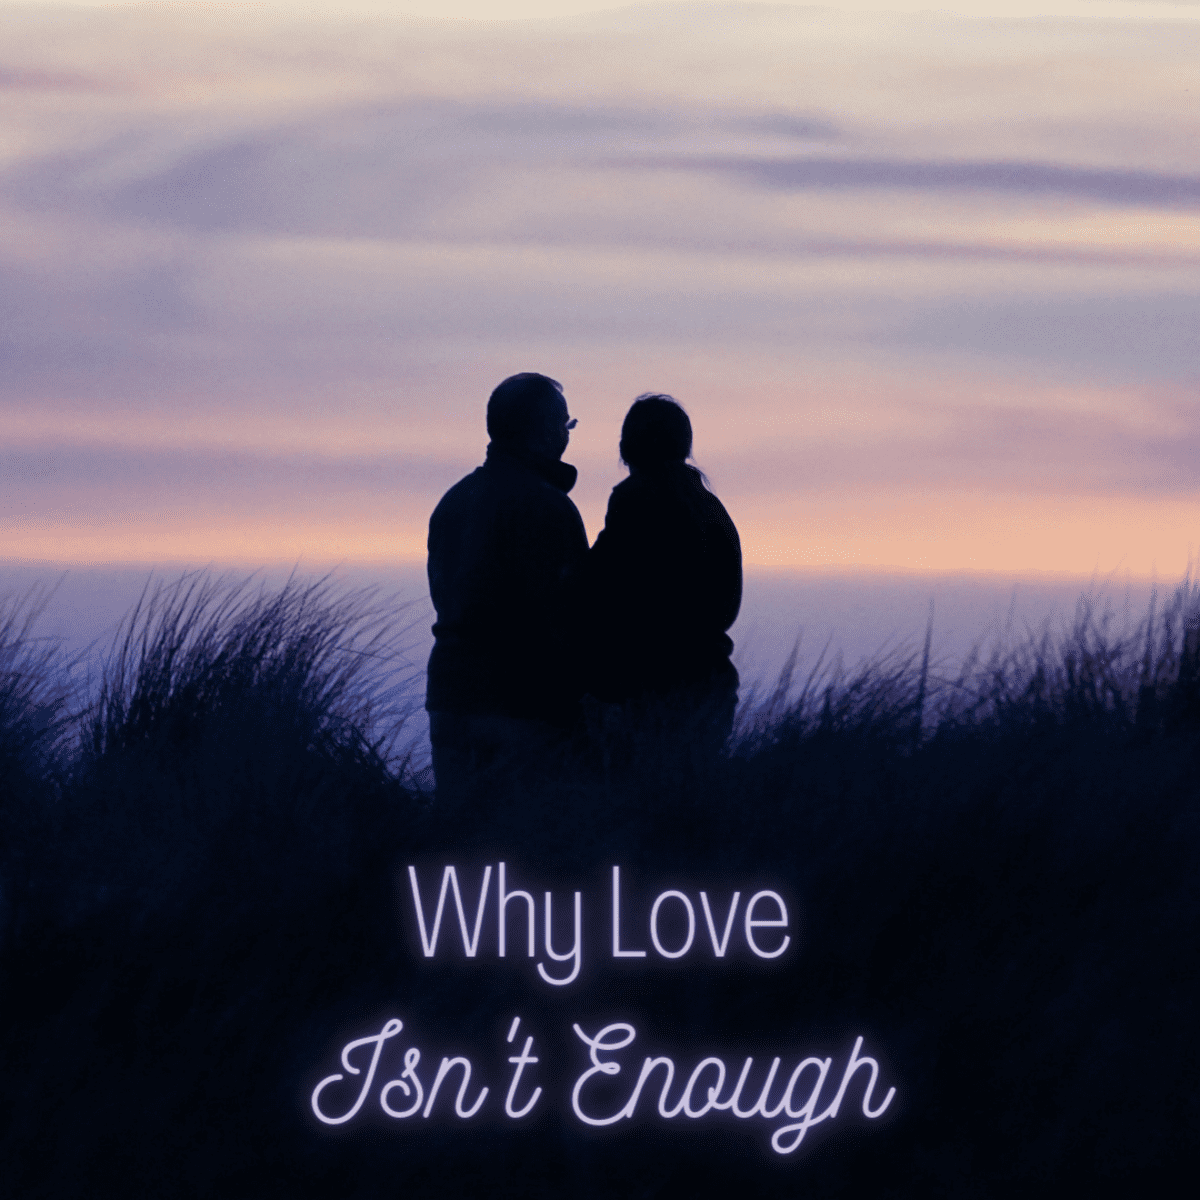 Love Alone Is Not Enough - PairedLife